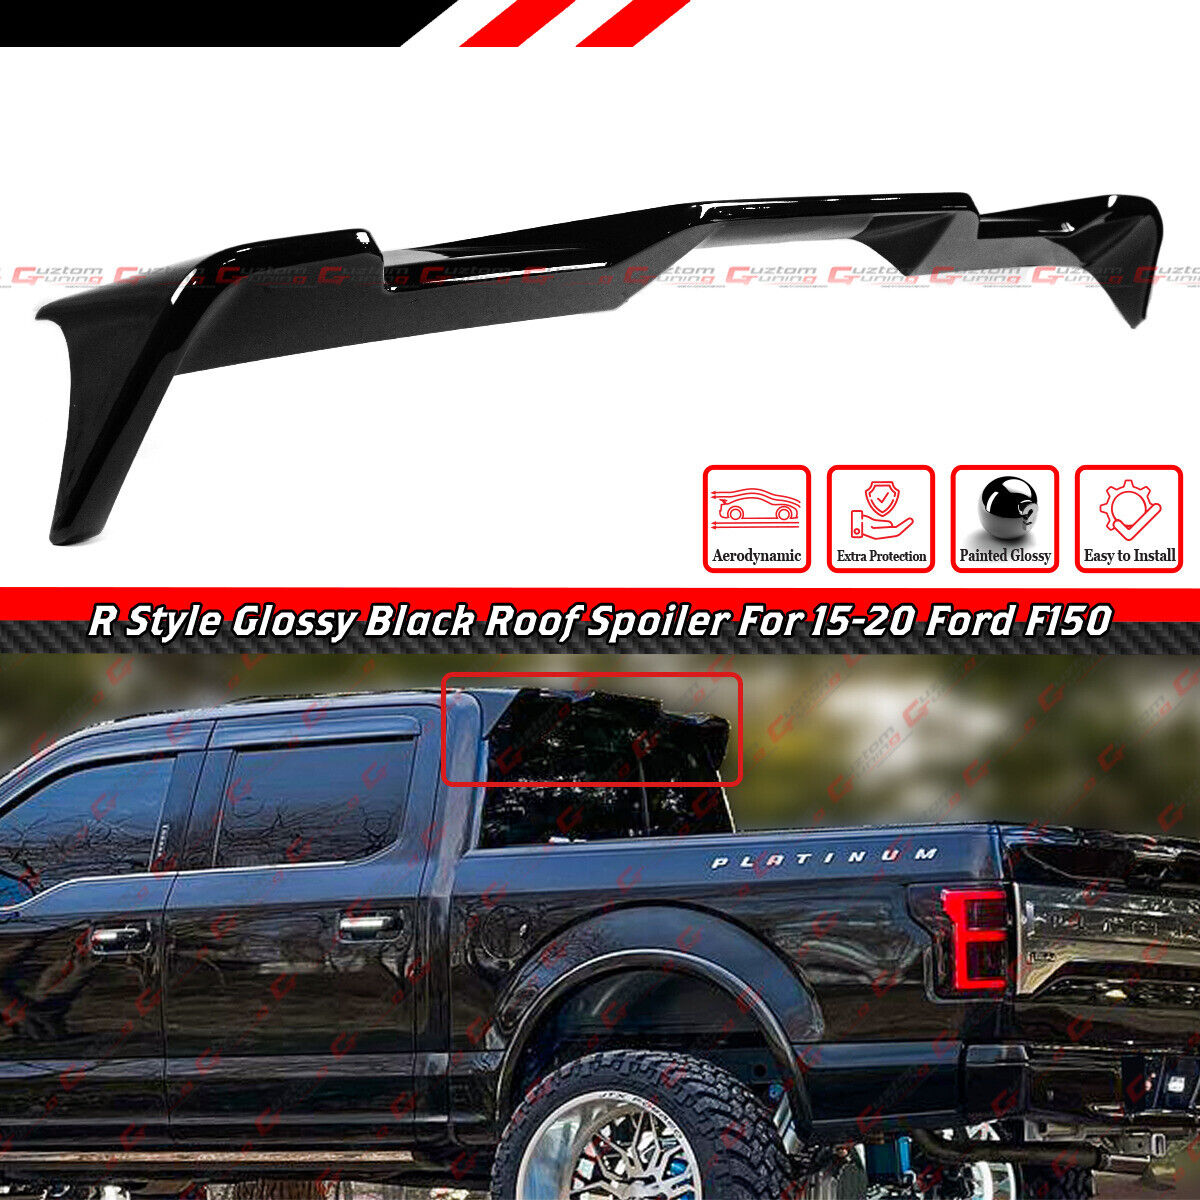 FOR 2015-20 FORD F-150 R STYLE GLOSSY BLACK REAR TRUCK TOP CAB ROOF SPOILER WING